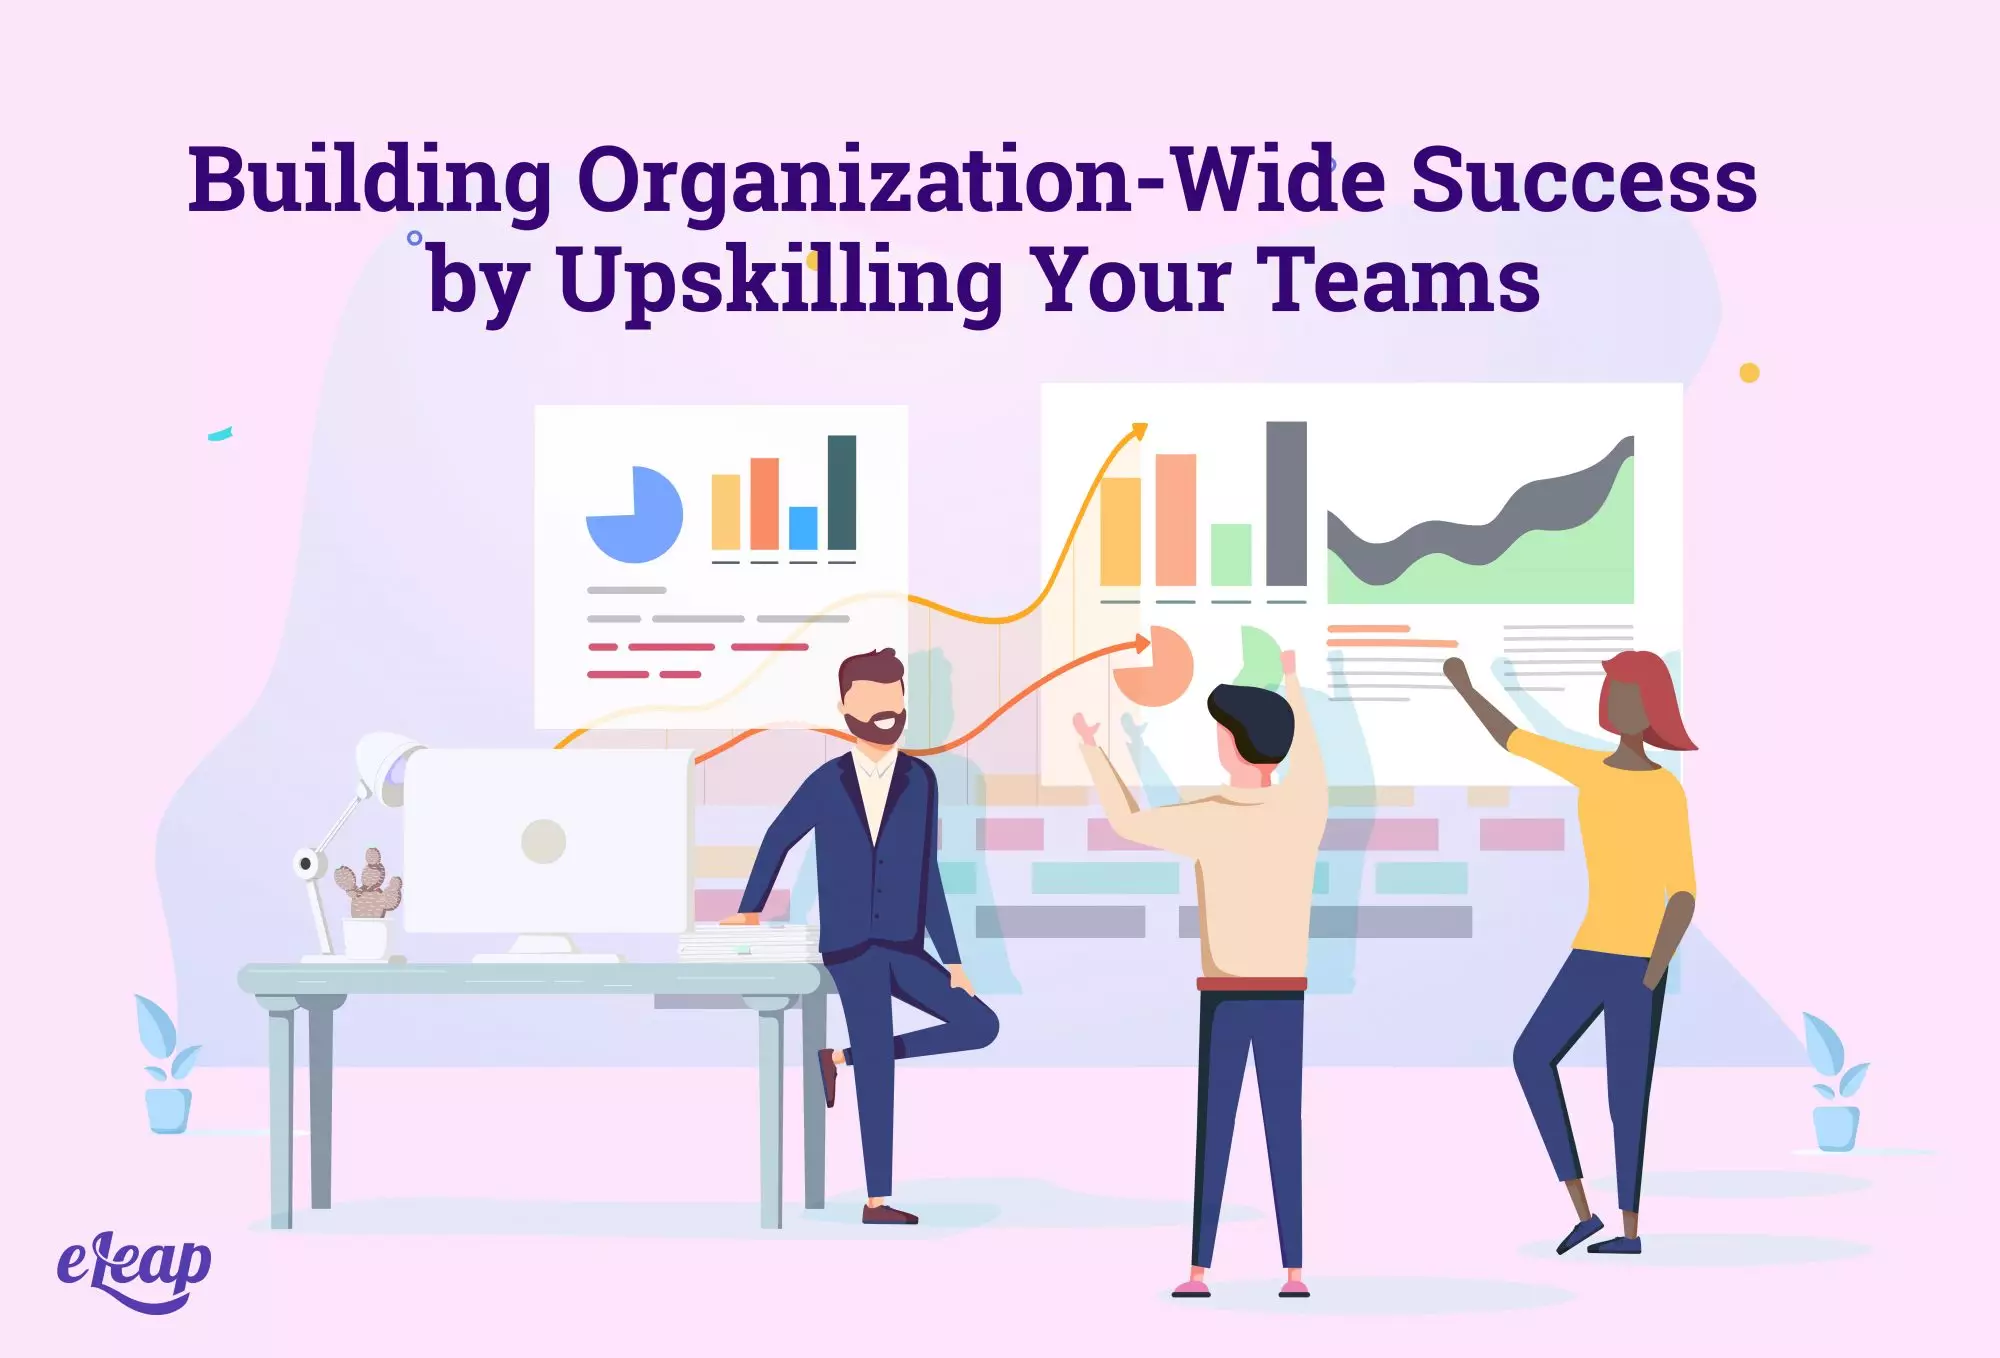 Building Organization-Wide Success by Upskilling Your Teams